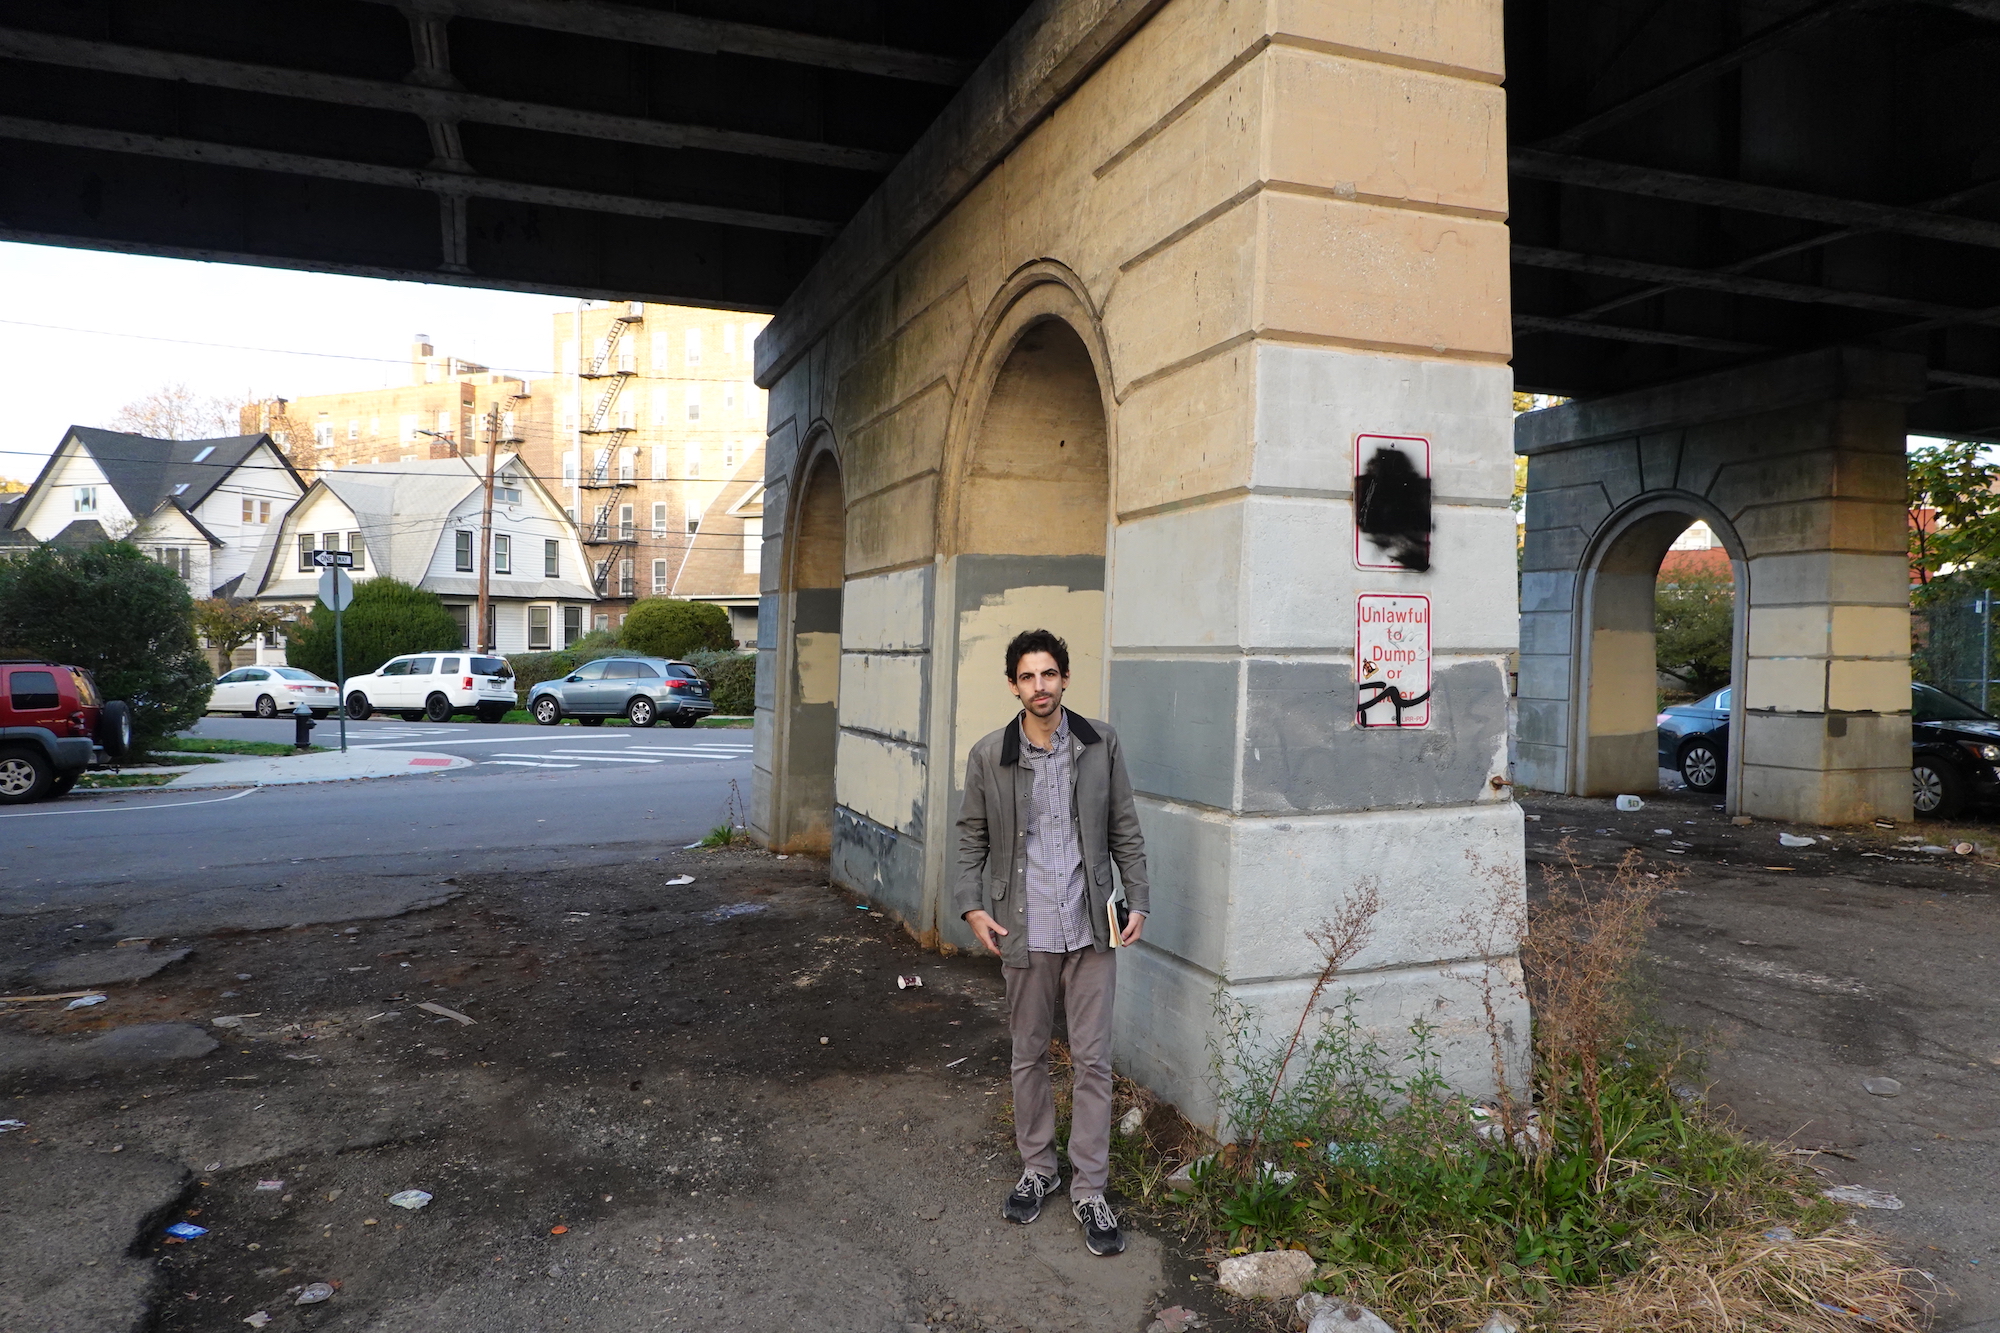 The author of the story stands next to an overpass during the "Goodfellas" tour.